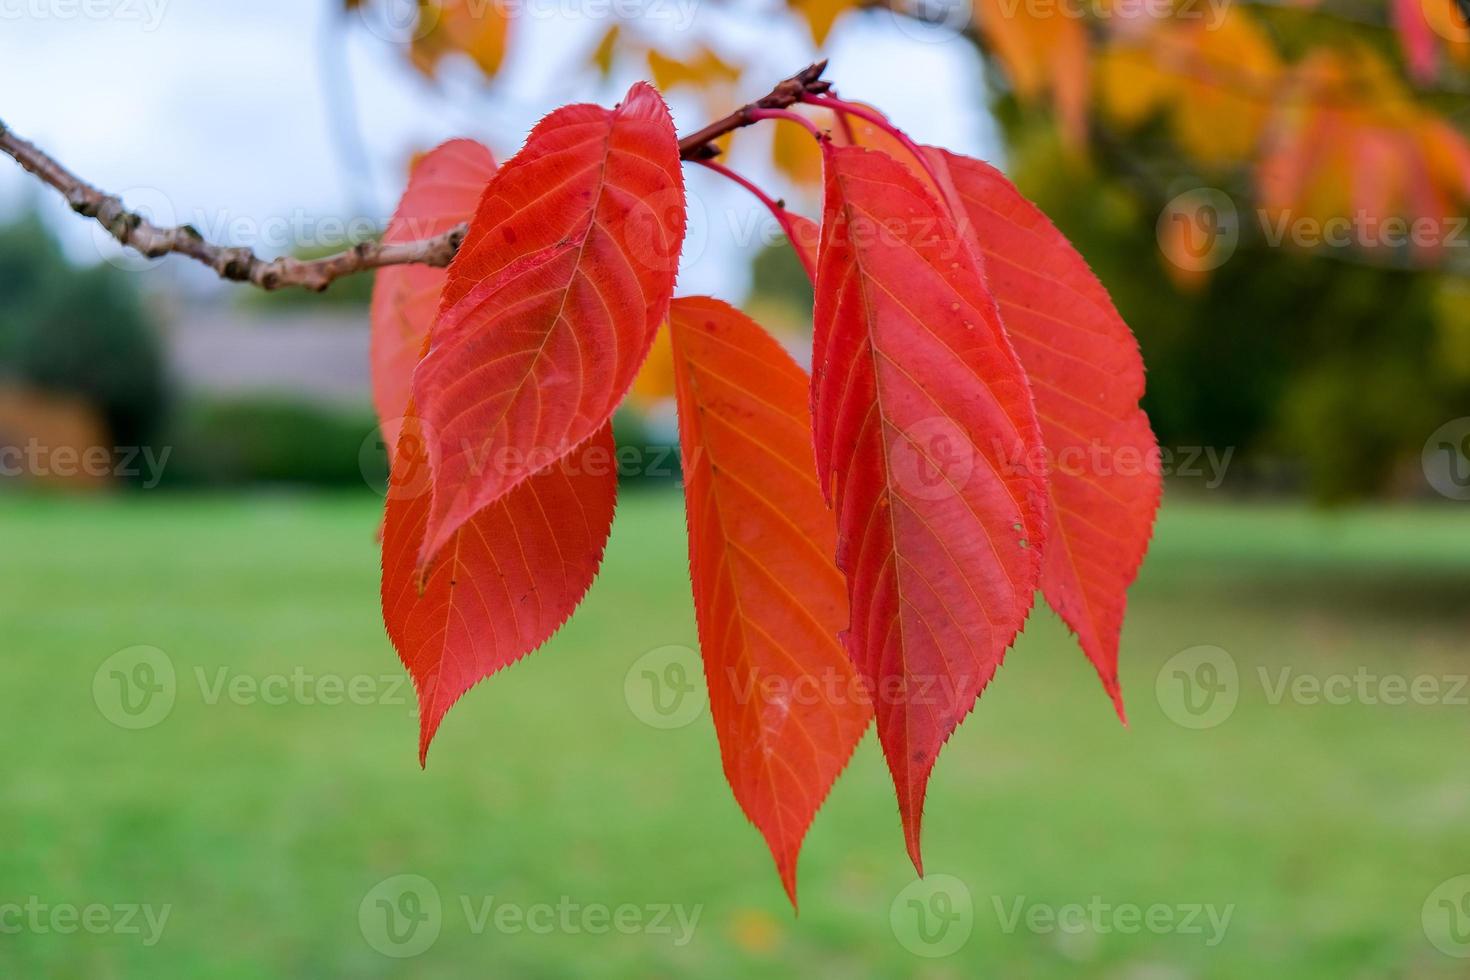 Bird Cherry tree leaves in autumn in East Grinstead photo